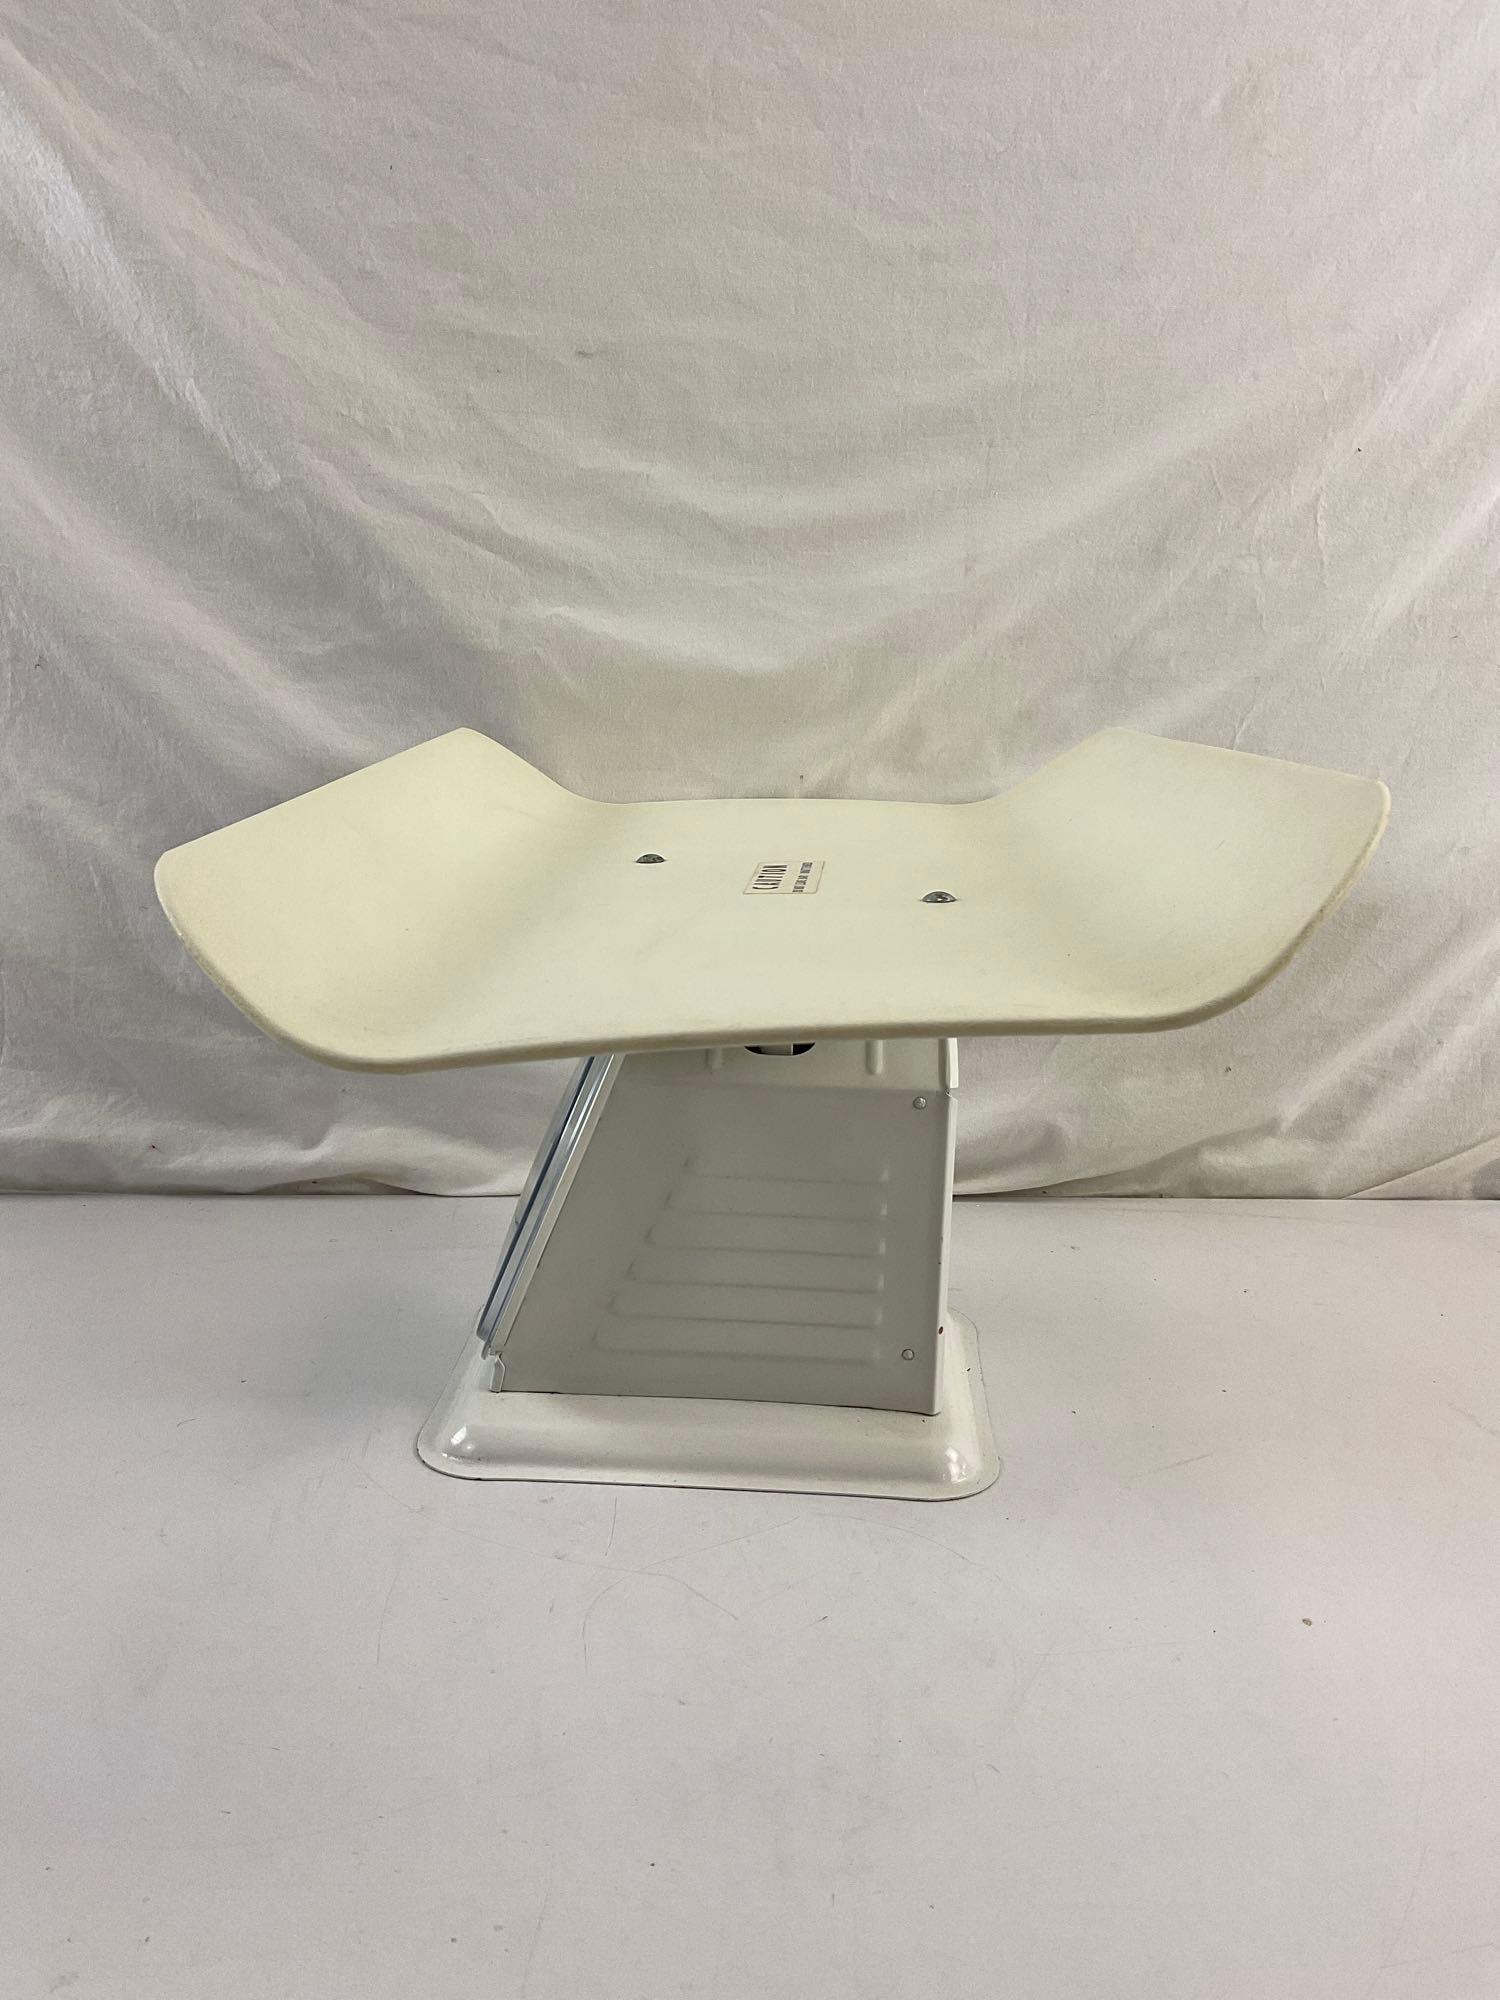 Vintage Metal & Plastic Montgomery Ward Infant Scale. Weighs 30 Pounds by Ounces. See pics.